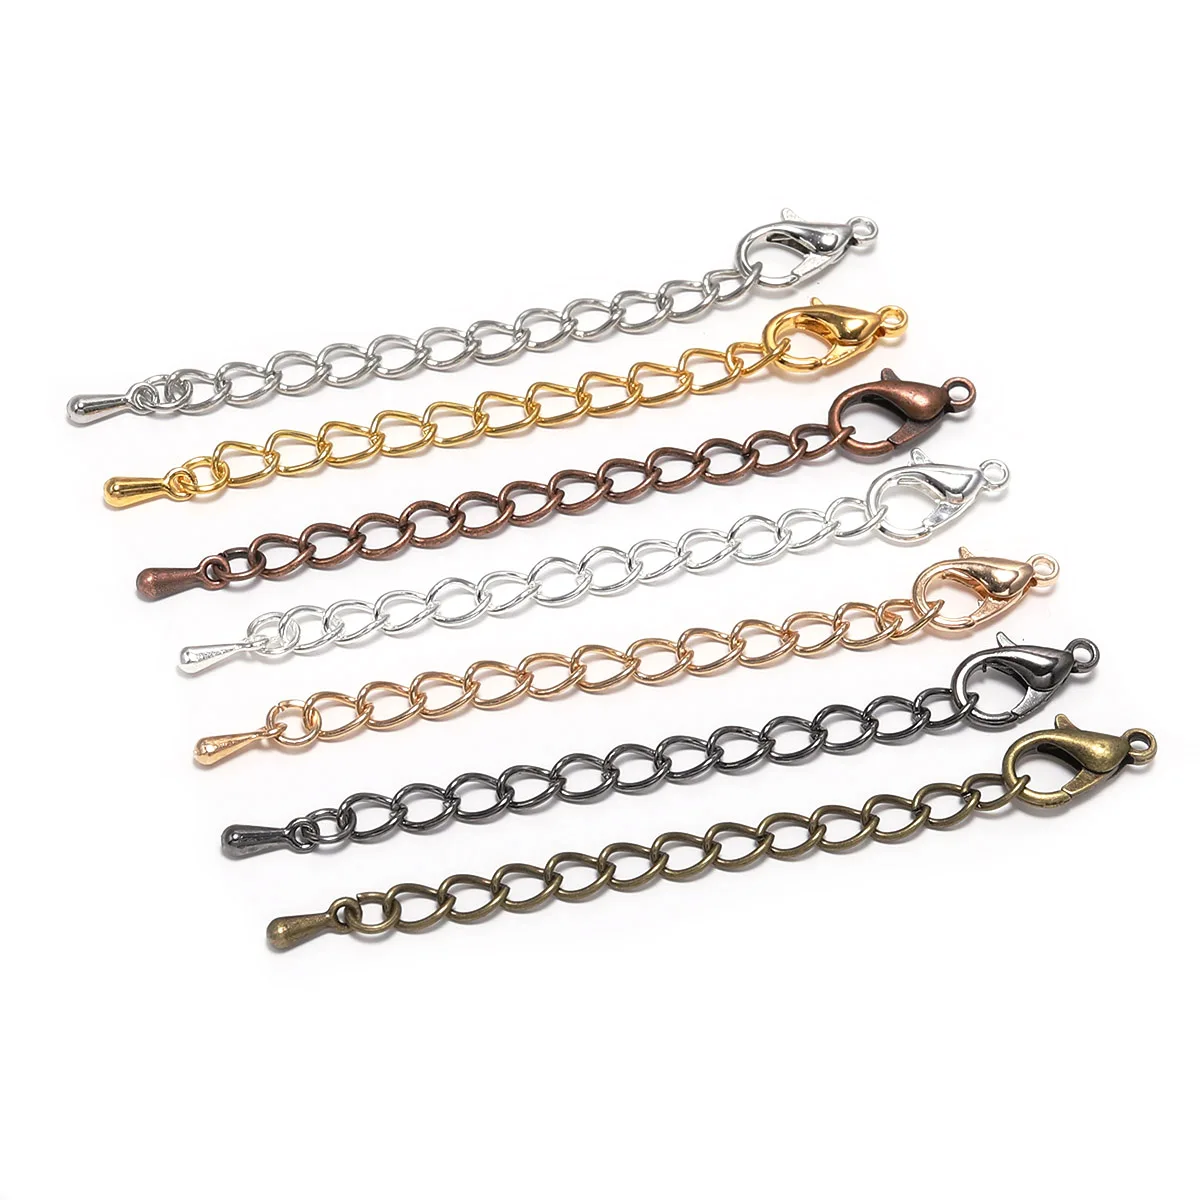 10pcs/lot 50 70mm Tone Extended Extension Tail Chain Lobster Clasps Connector For DIY Bracelet Necklace Jewelry Making Findings